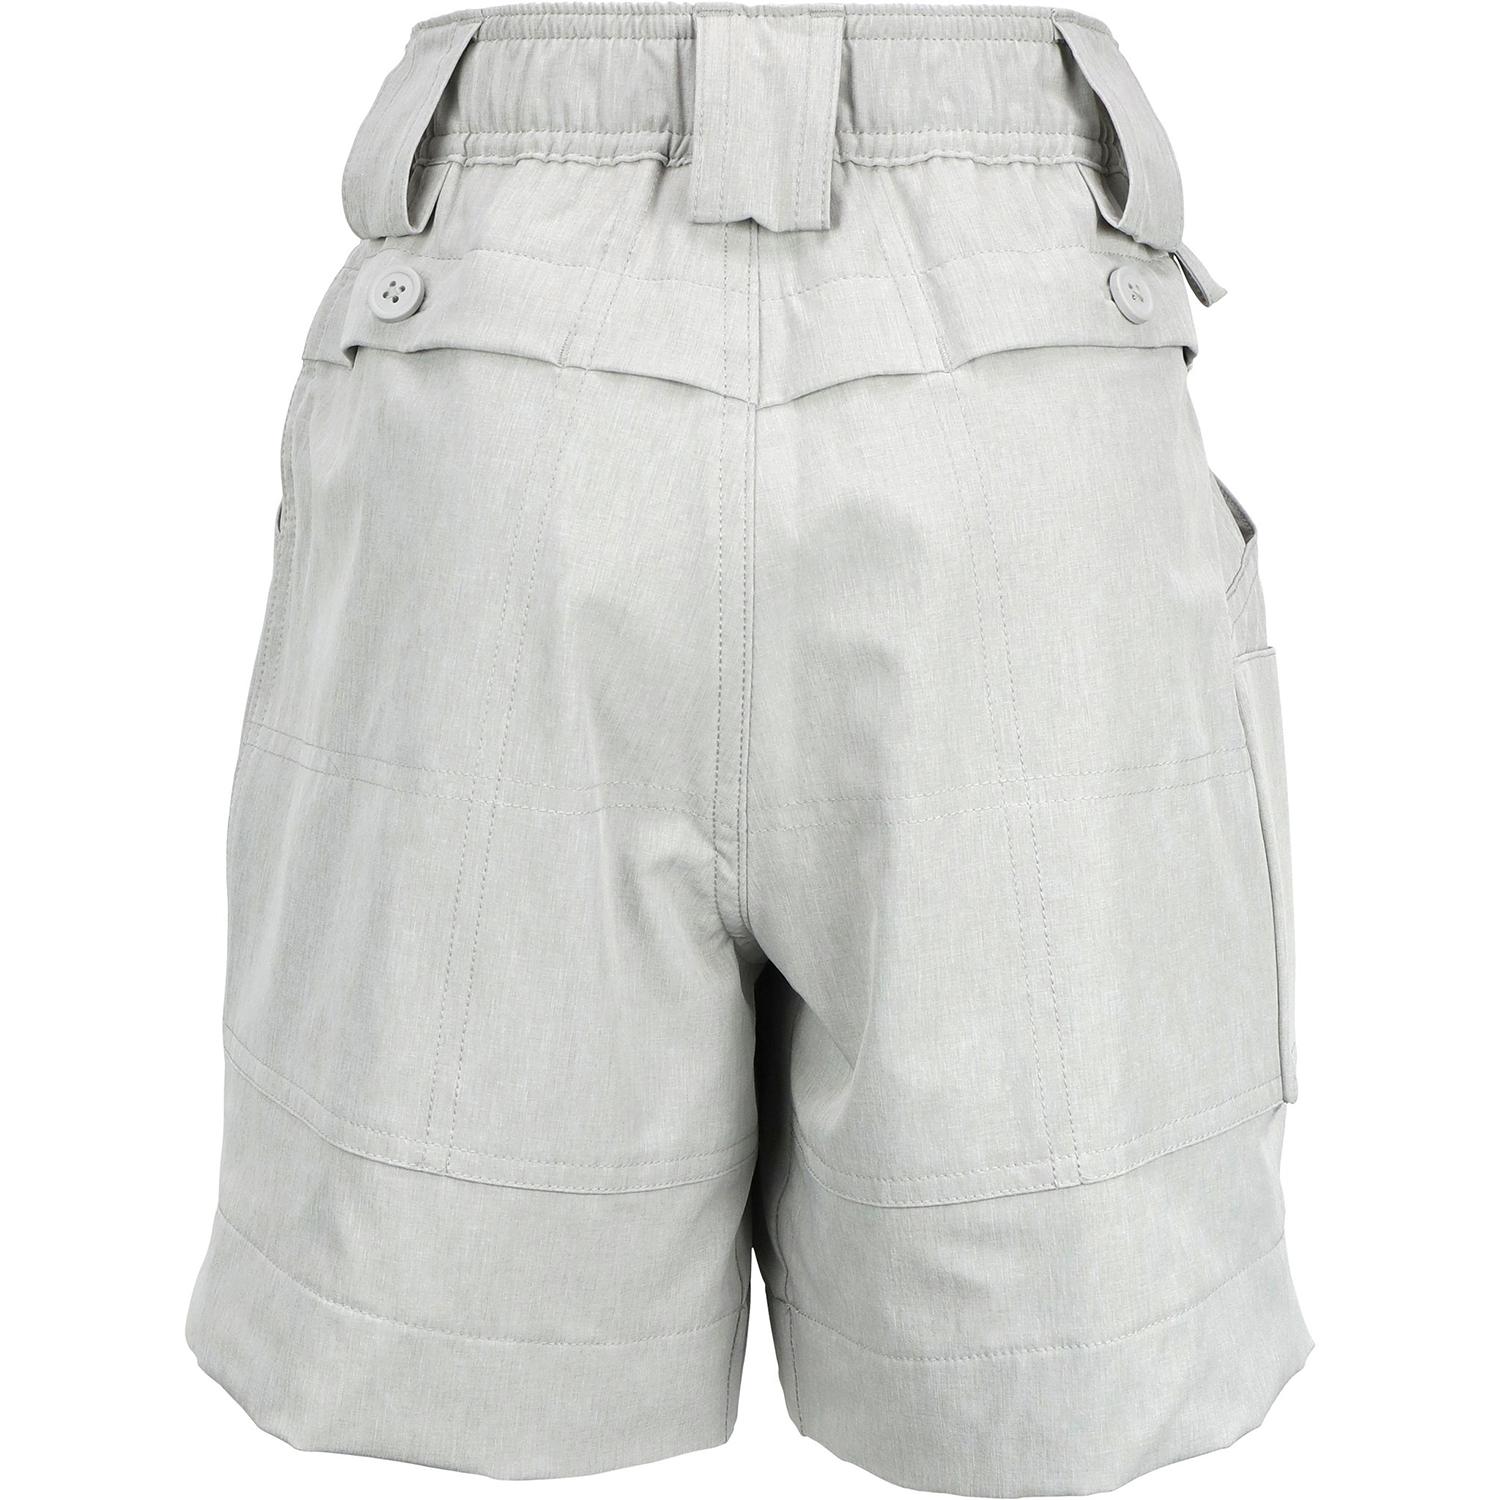 AFTCO YOUTH STRETCH ORIGINAL FISHING SHORTS